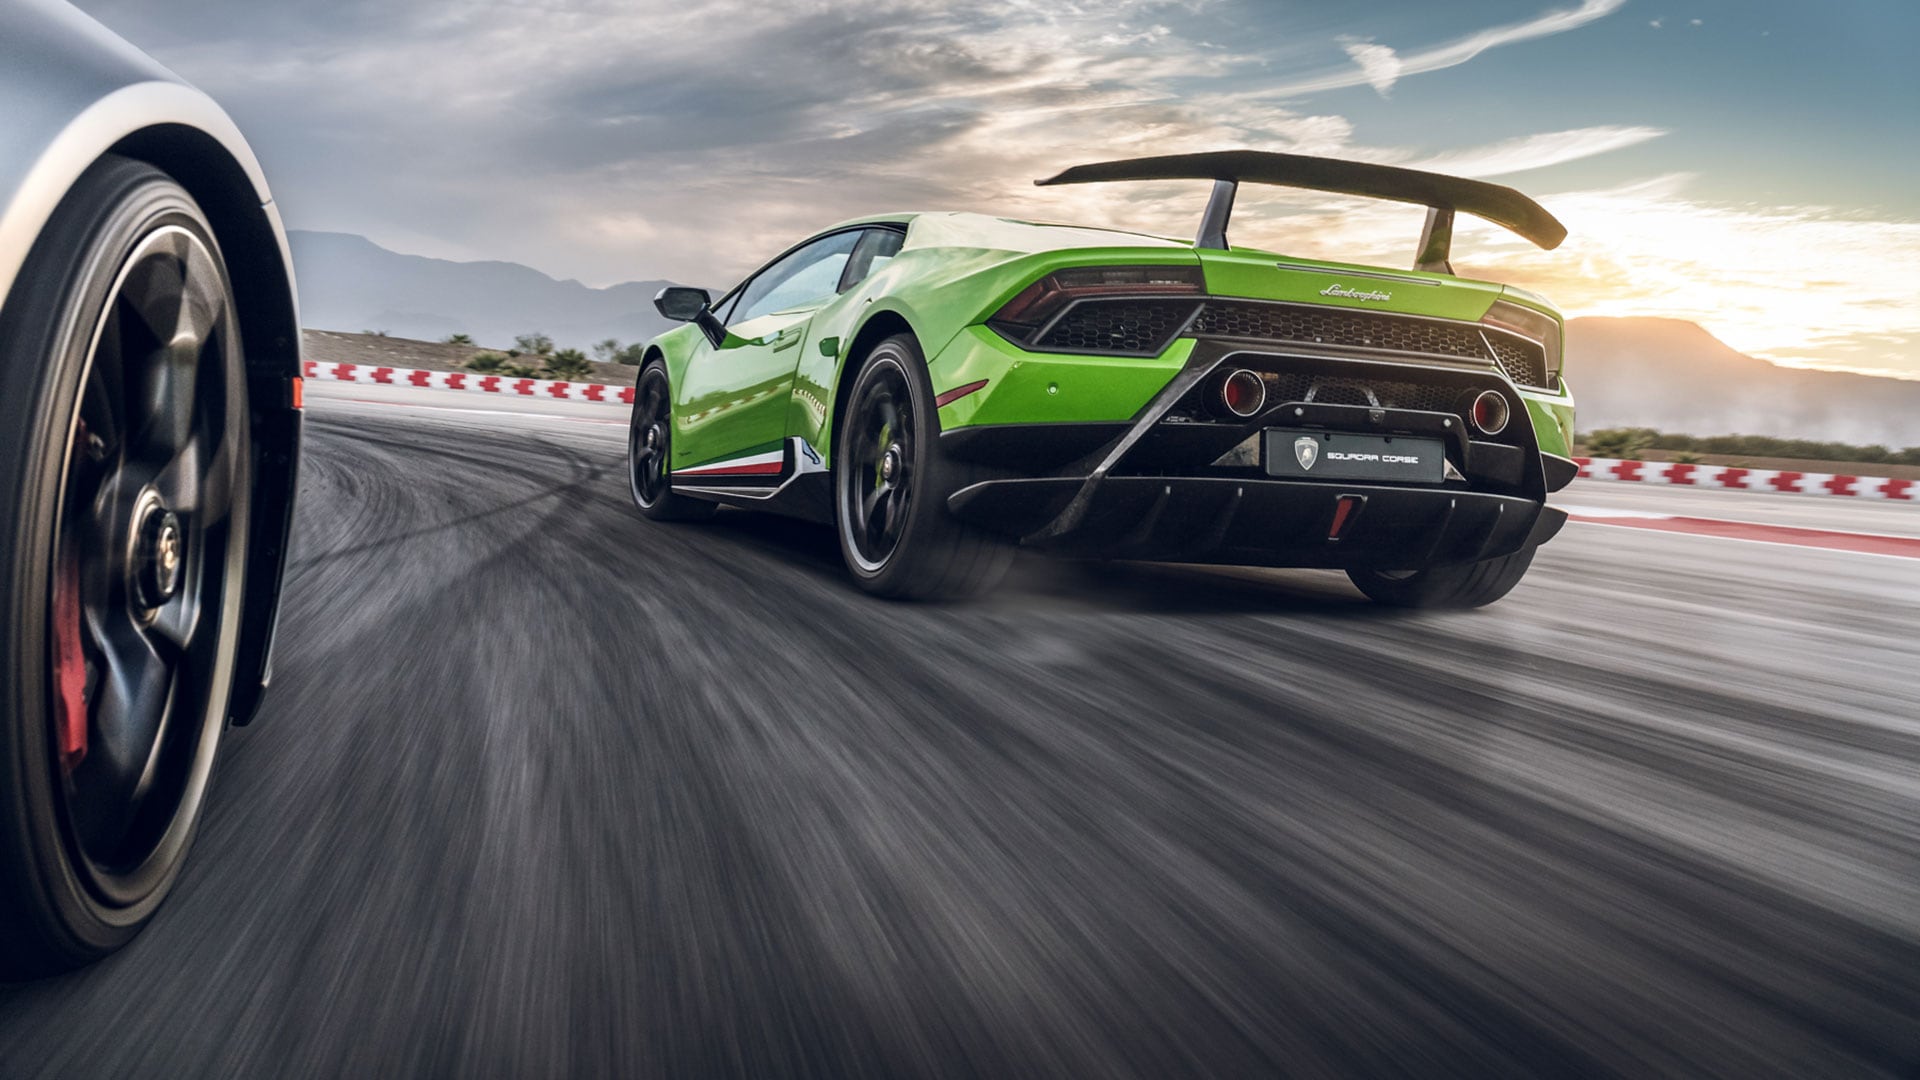 Huracán Performante Named 2018 Robb Report Car of the Year